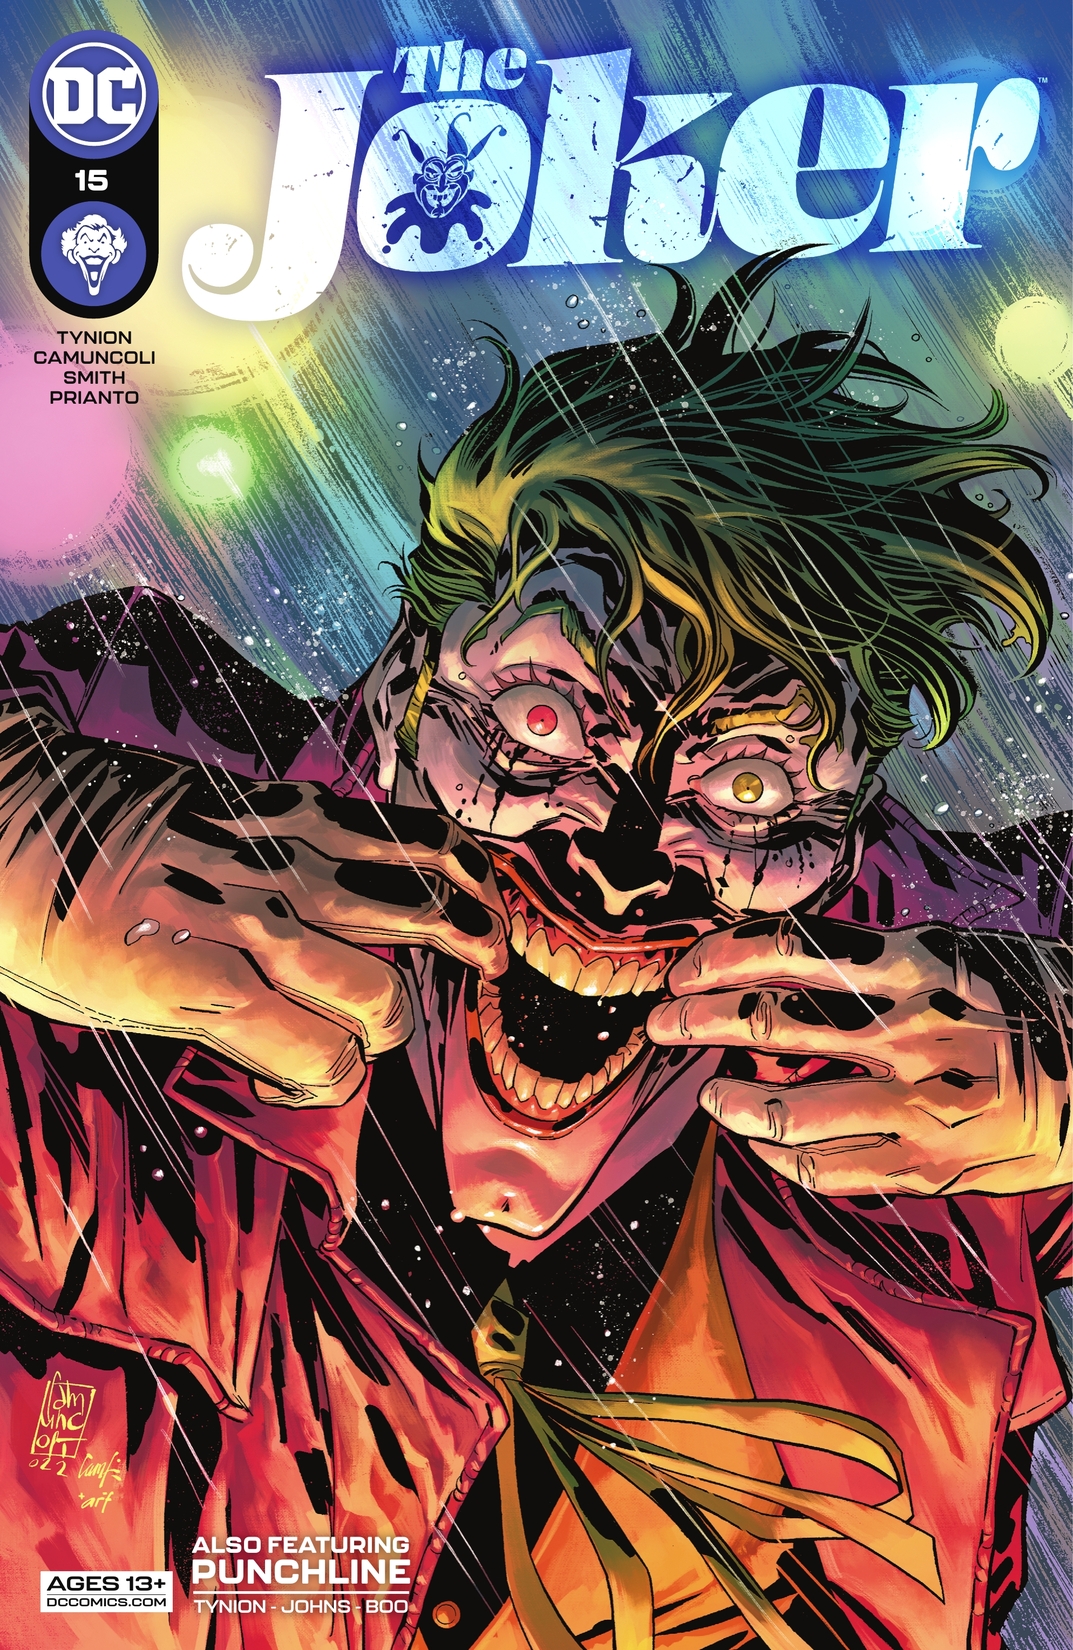 The Joker #15 preview images